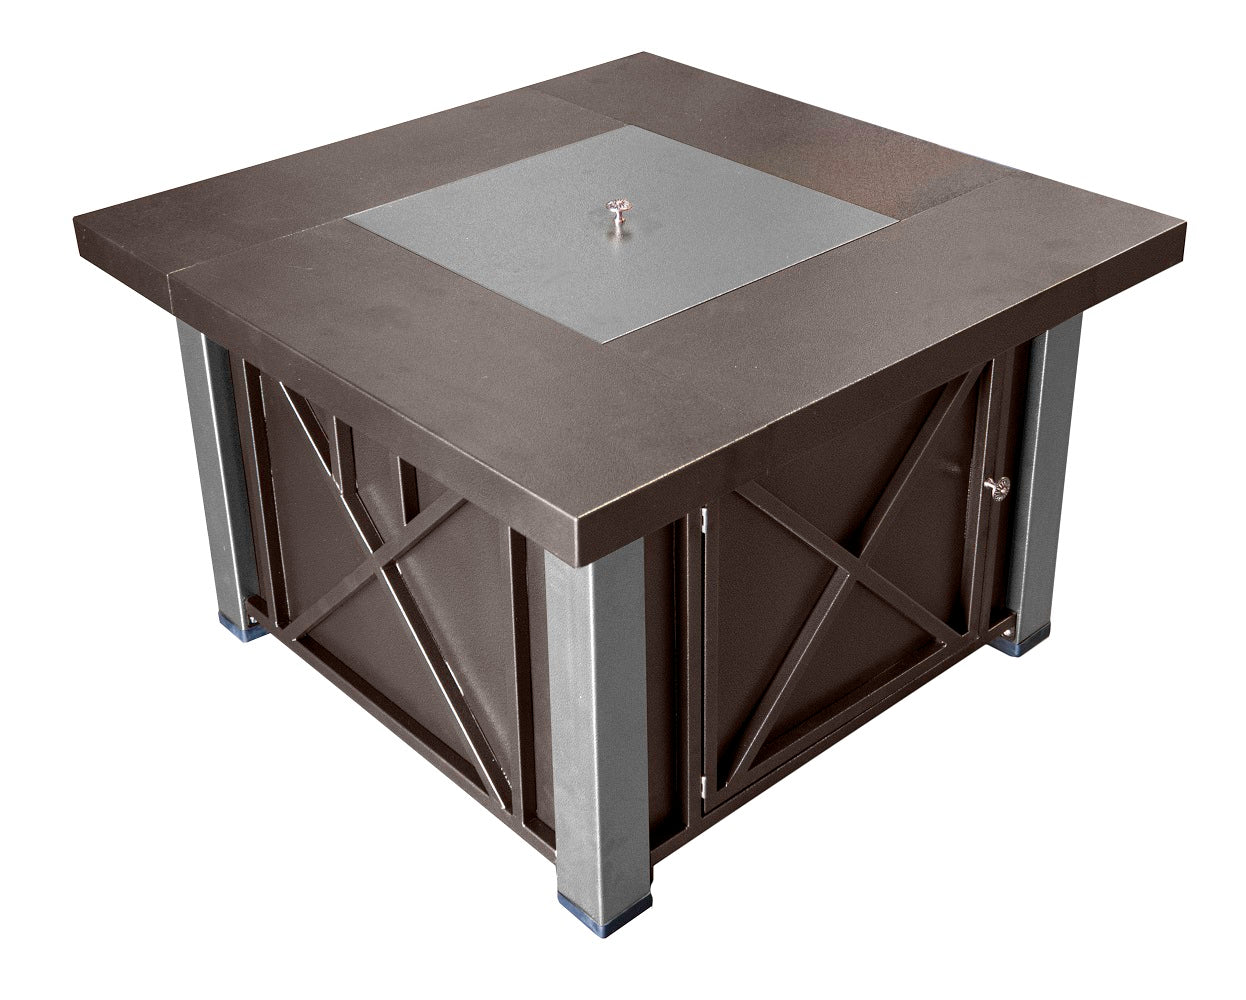 Hiland Decorative Fire Pit with Stainless Steel Legs and Lid -Hammered Bronze- GSF-DGHSS- Side View